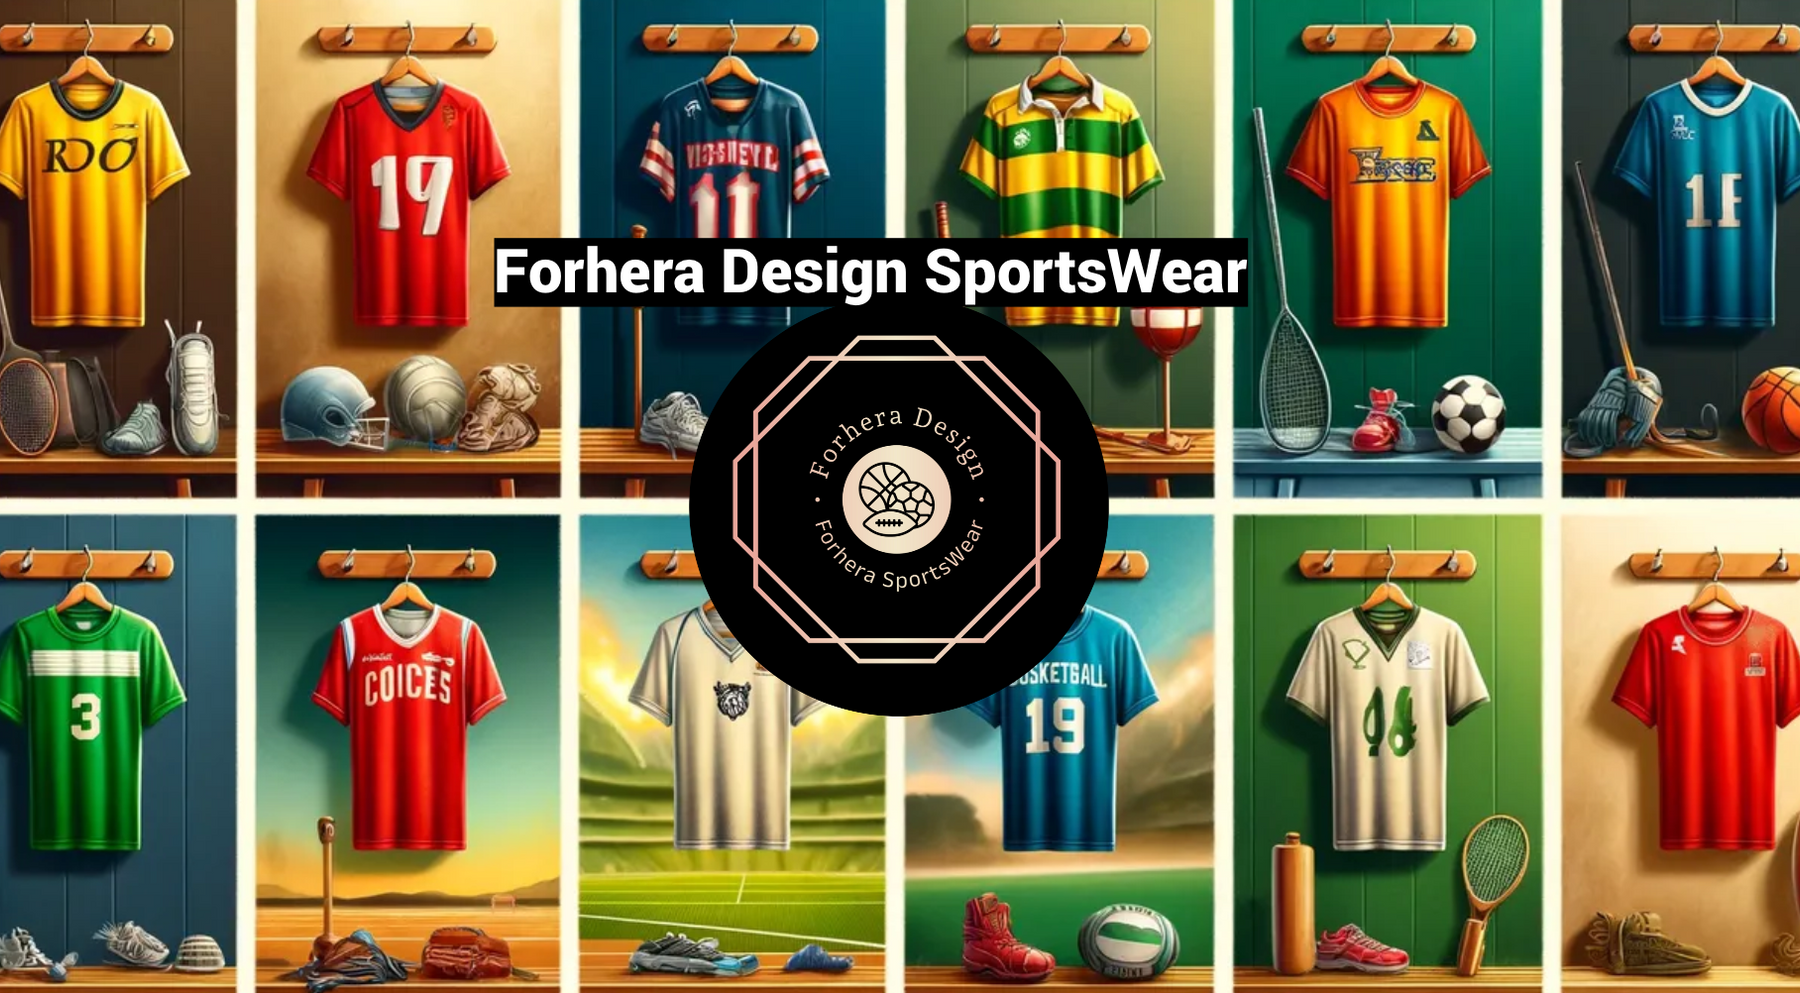 Experience Excellence in Sports Apparel with Forhera Sportswear